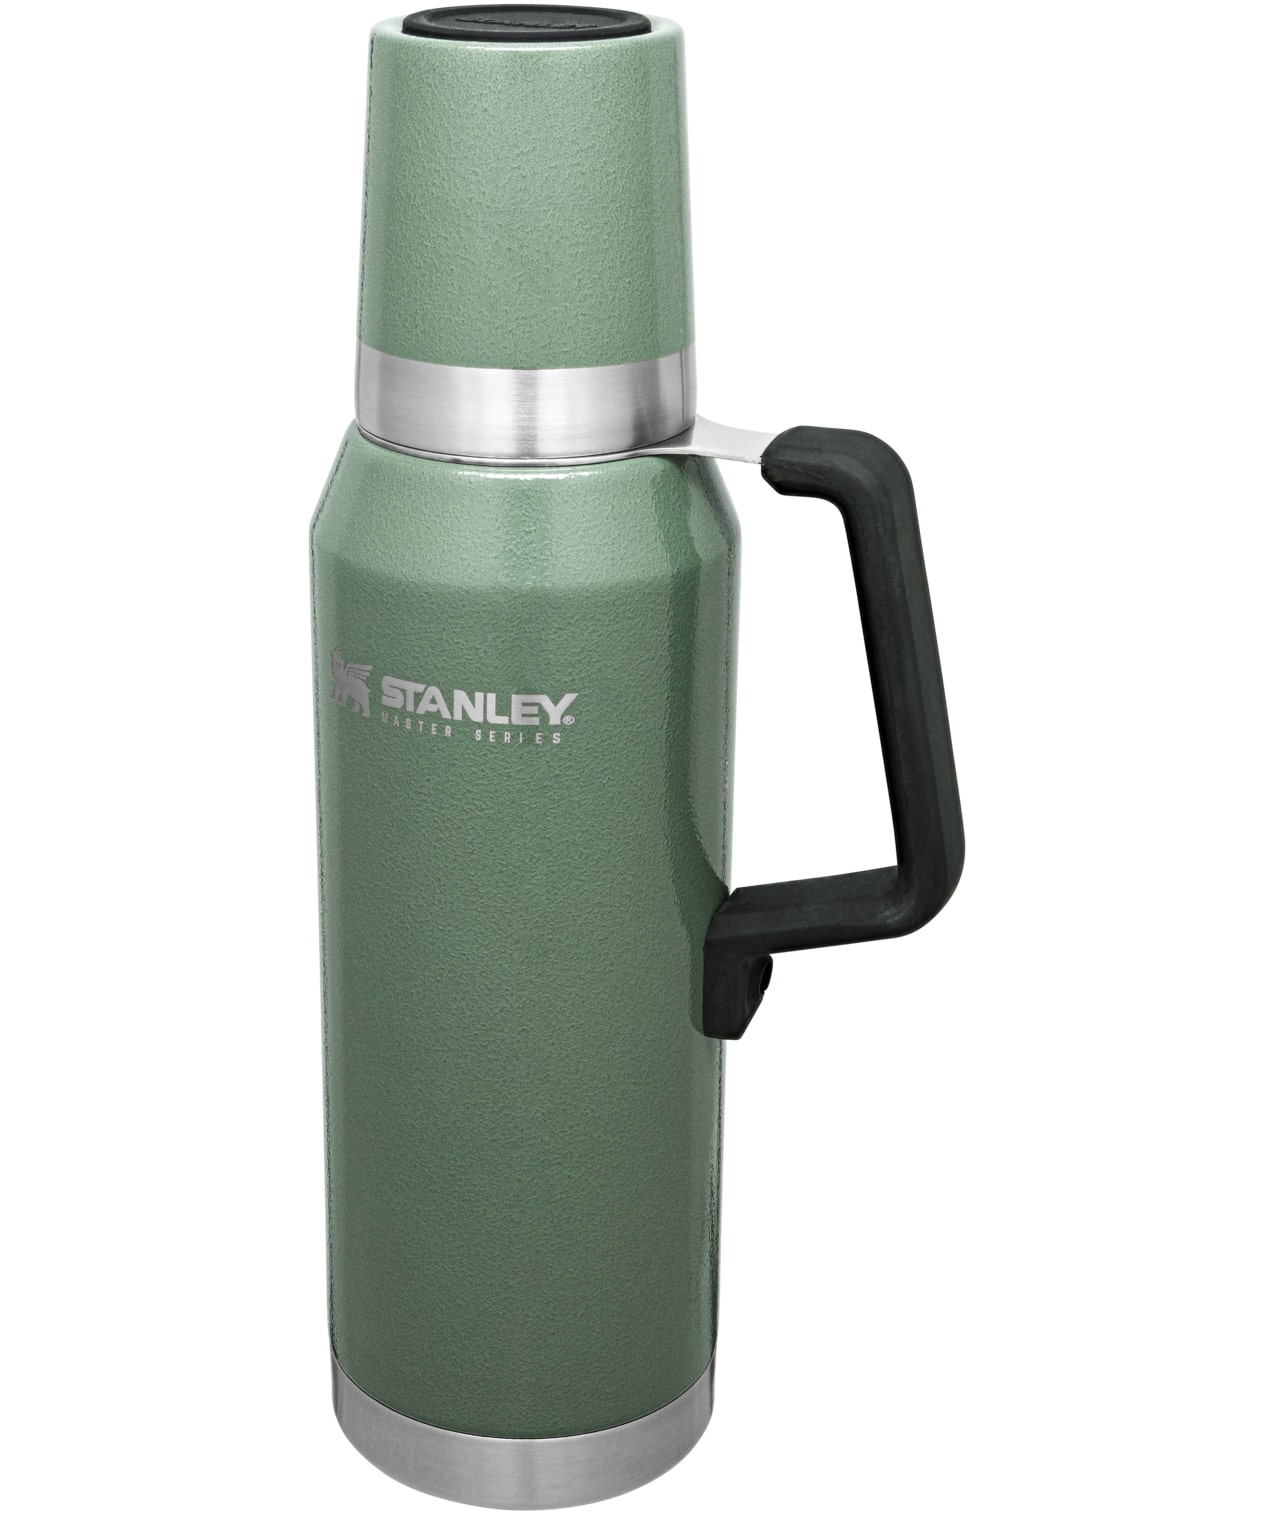 Bình giữ nhiệt Stanley Master Unbreakable Thermal 1.4QT | 1.3L